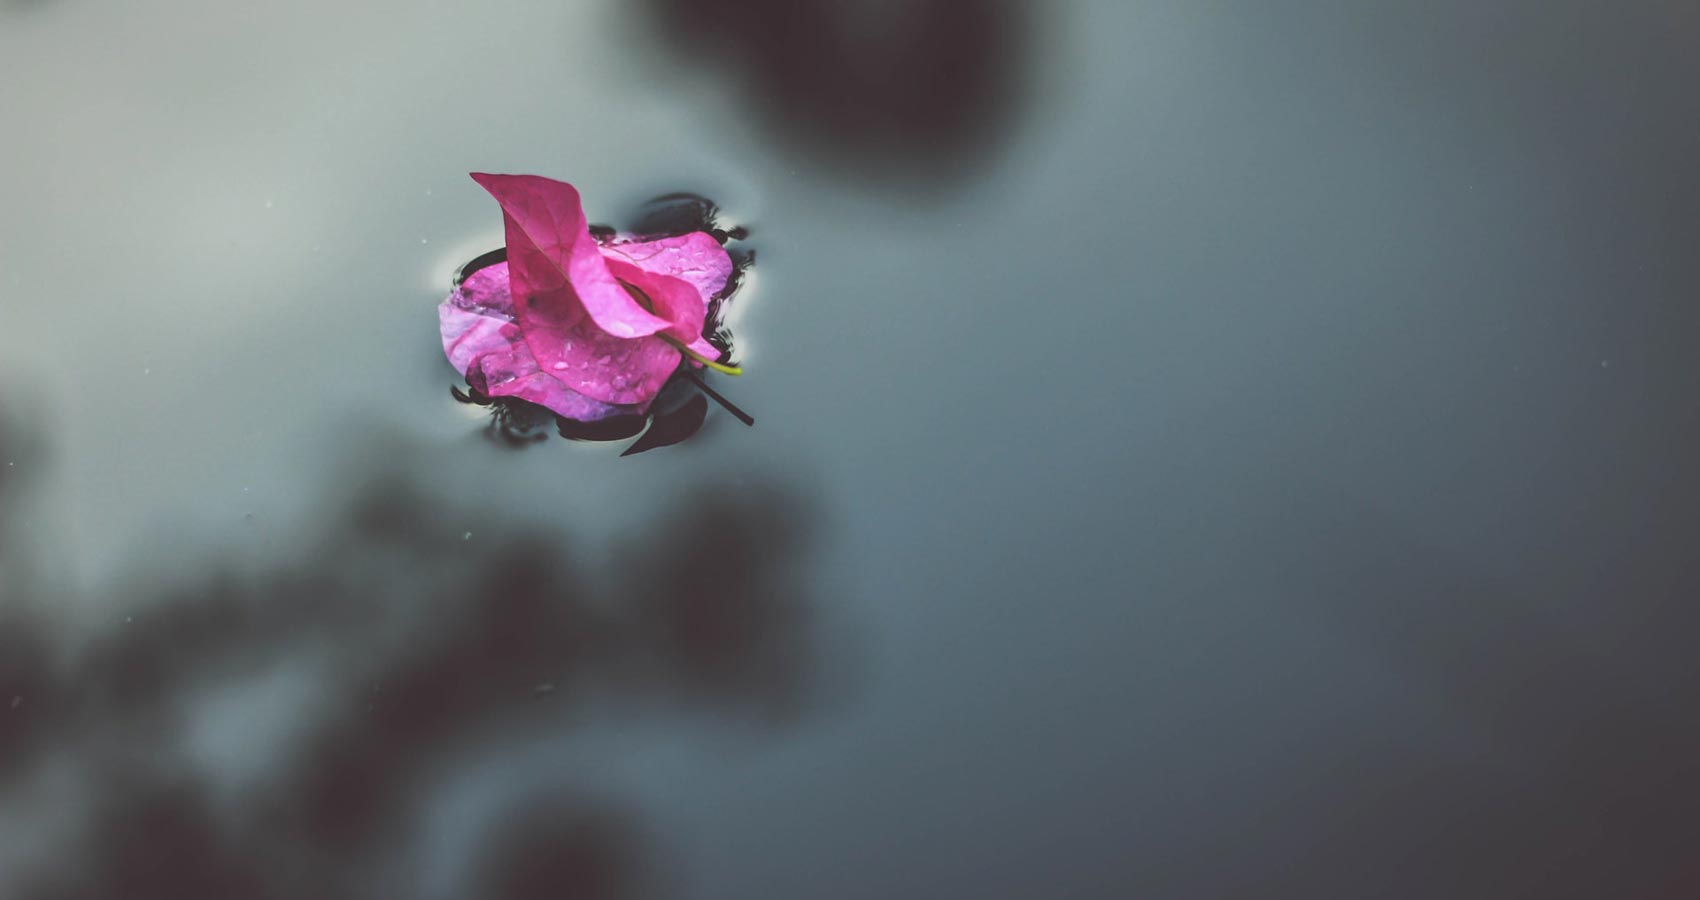 Petals in The Pool, a poem by Charlie Bottle at Spillwords.com